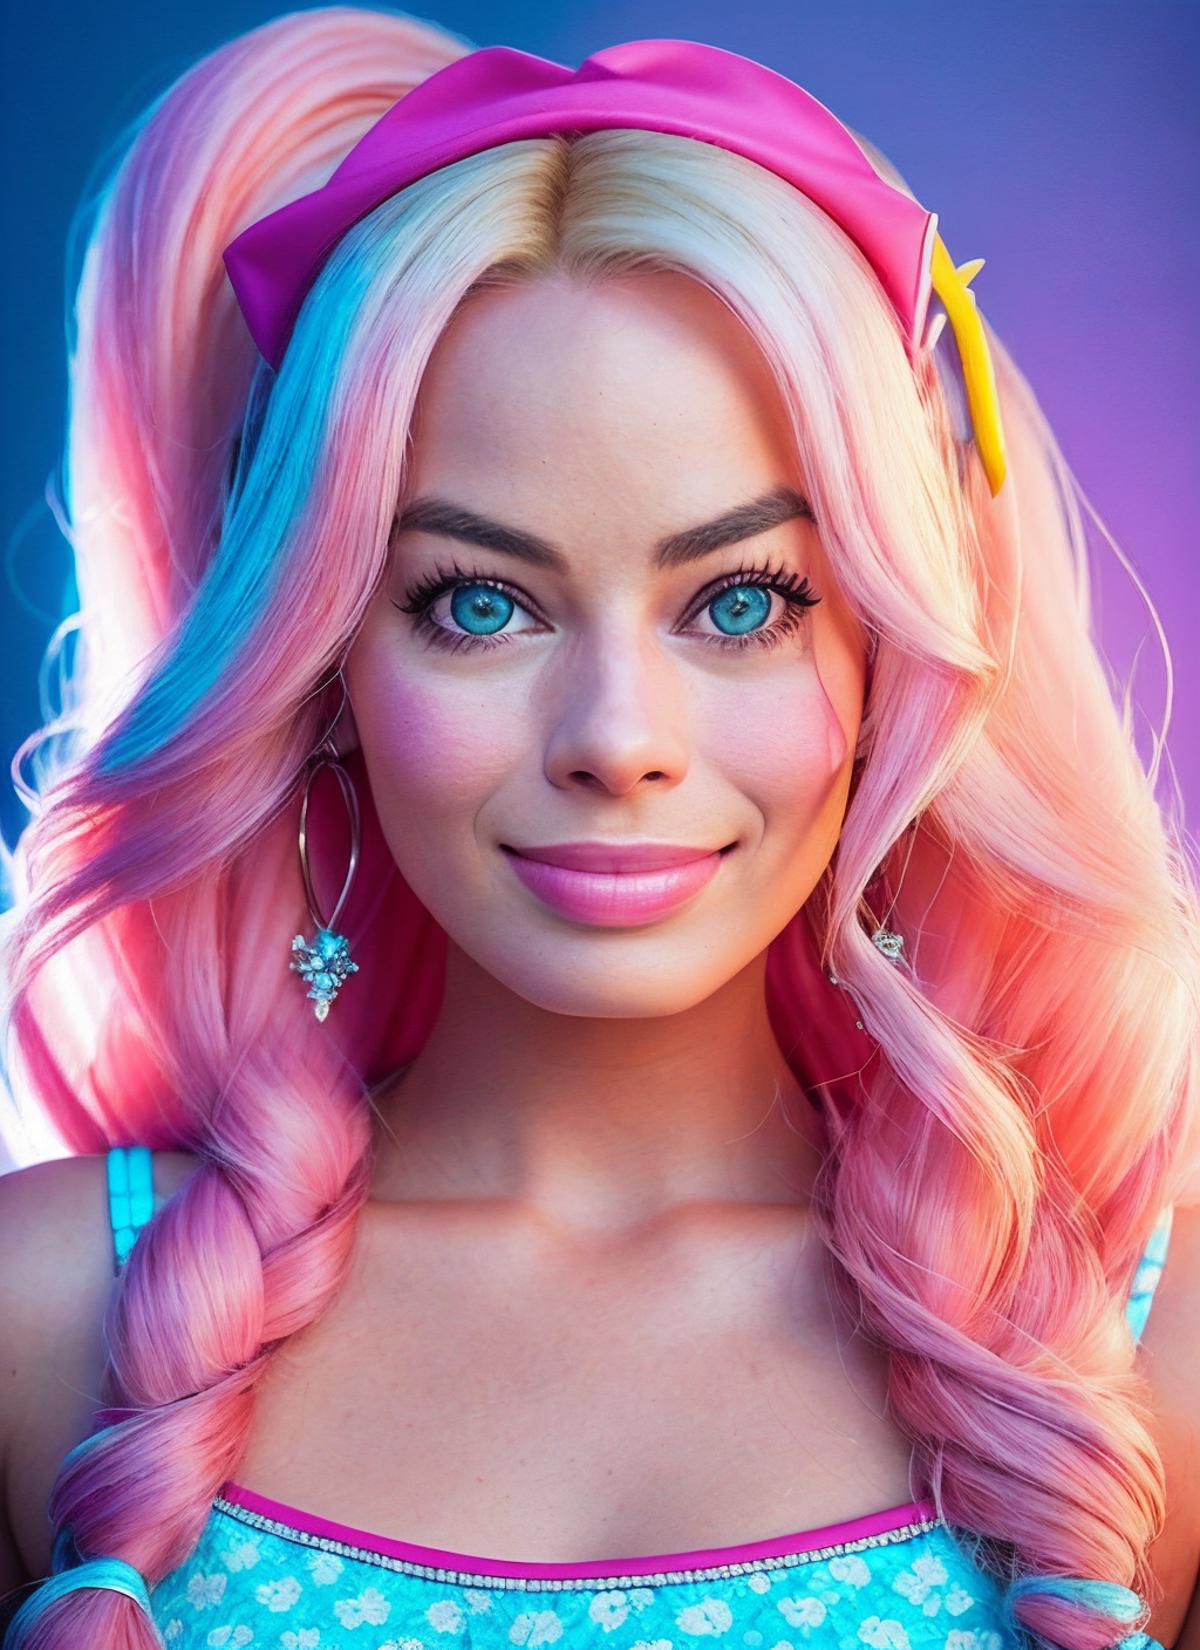 Margot Robbie (3 in 1 characters: Herself, Harley Quinn and Barbie) image by astragartist